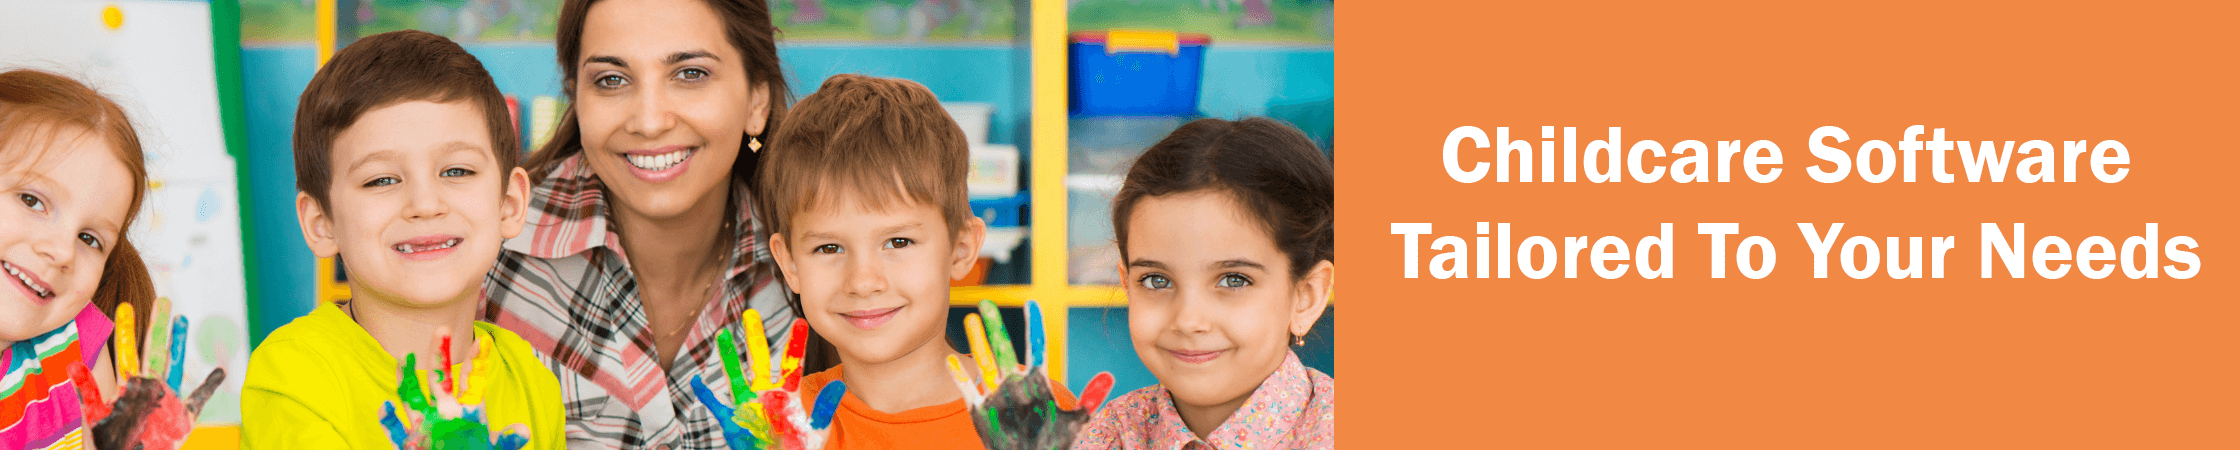 childcare software tailored to your needs